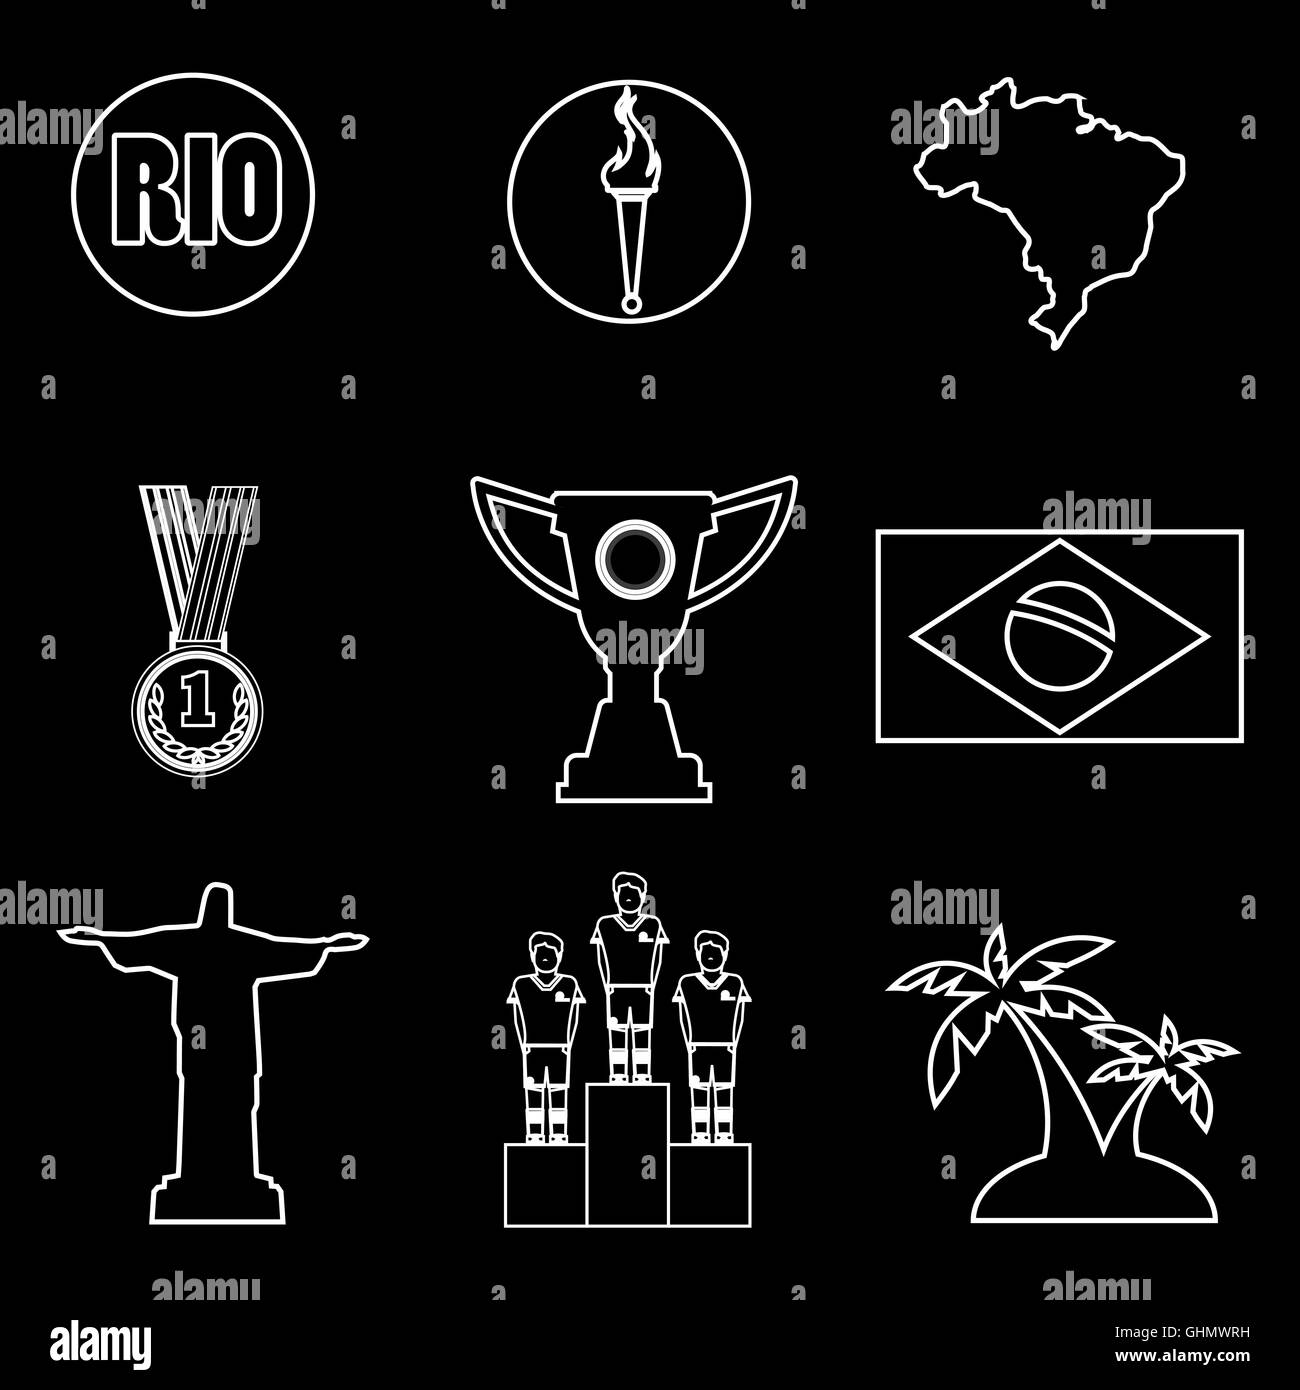 Rio, gold medal, burning torch and brazil flag icons set in outlines over black background. Digital vector image. Stock Photo